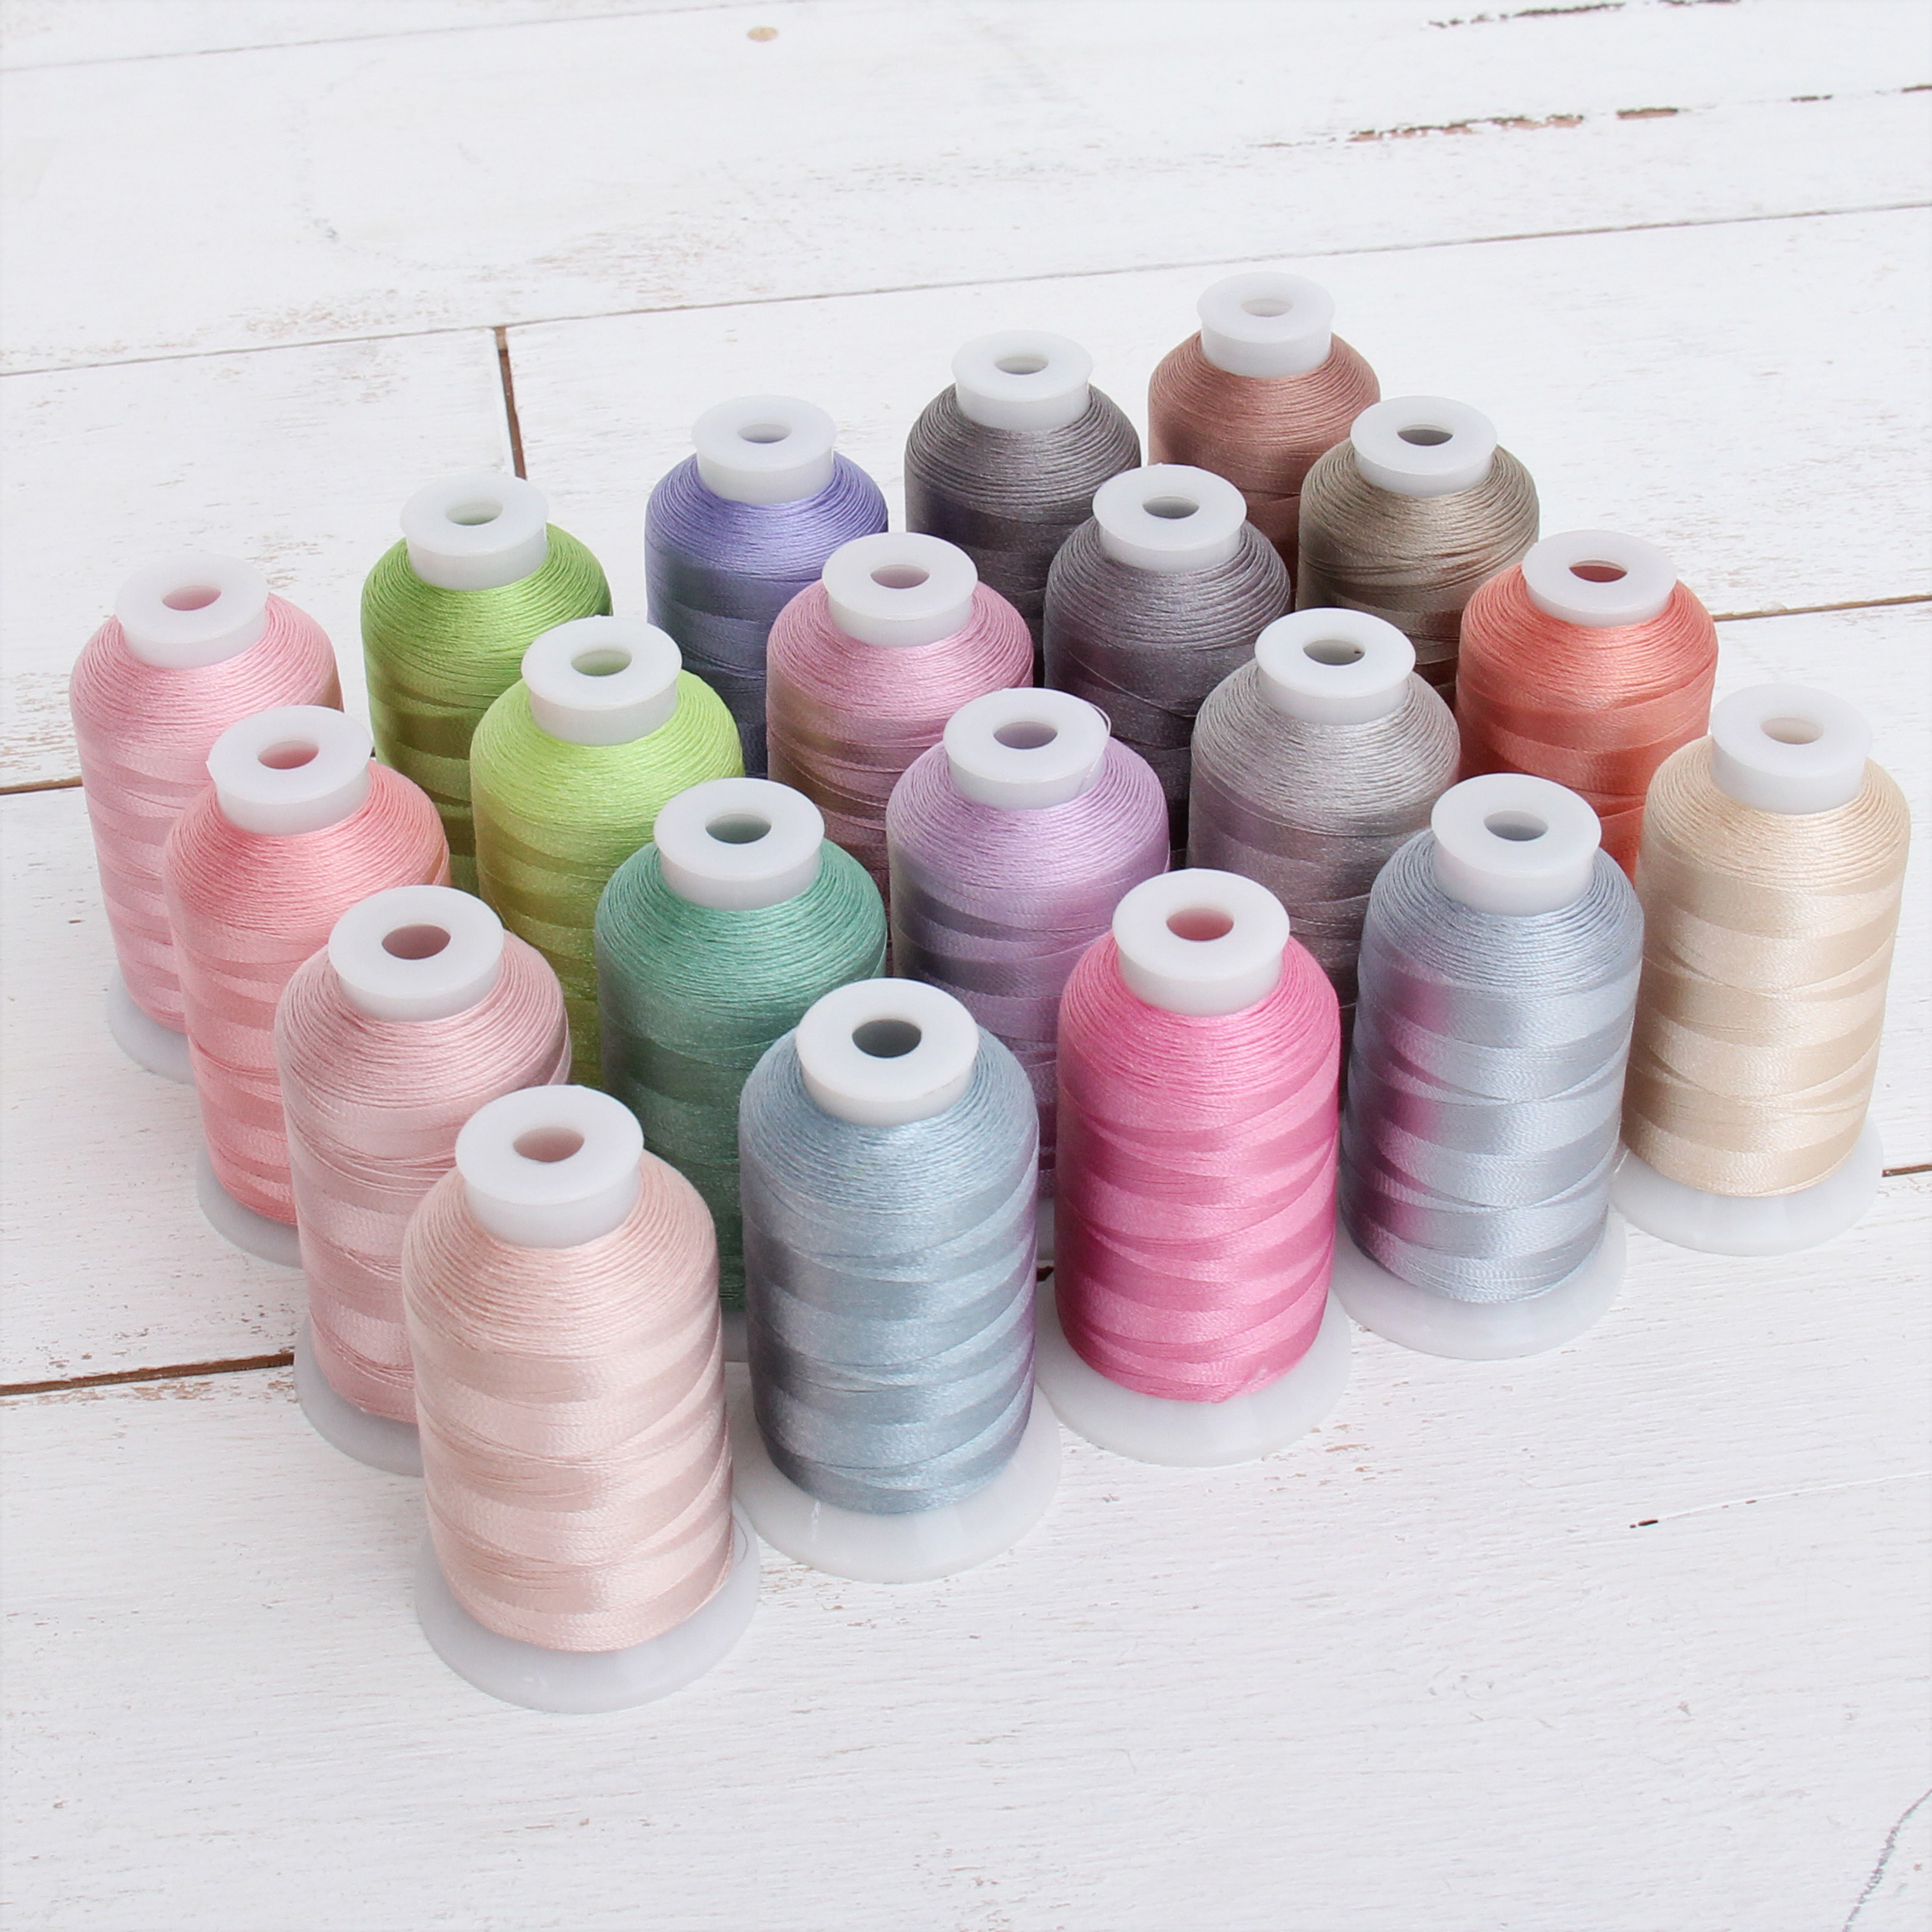 Beautiful 20 Cone Set of Rayon Embroidery Thread by Threadart - Pastel  Colors - 1000m Cones 40wt - Silky Luxurious Finish - For Machine Embroidery  and